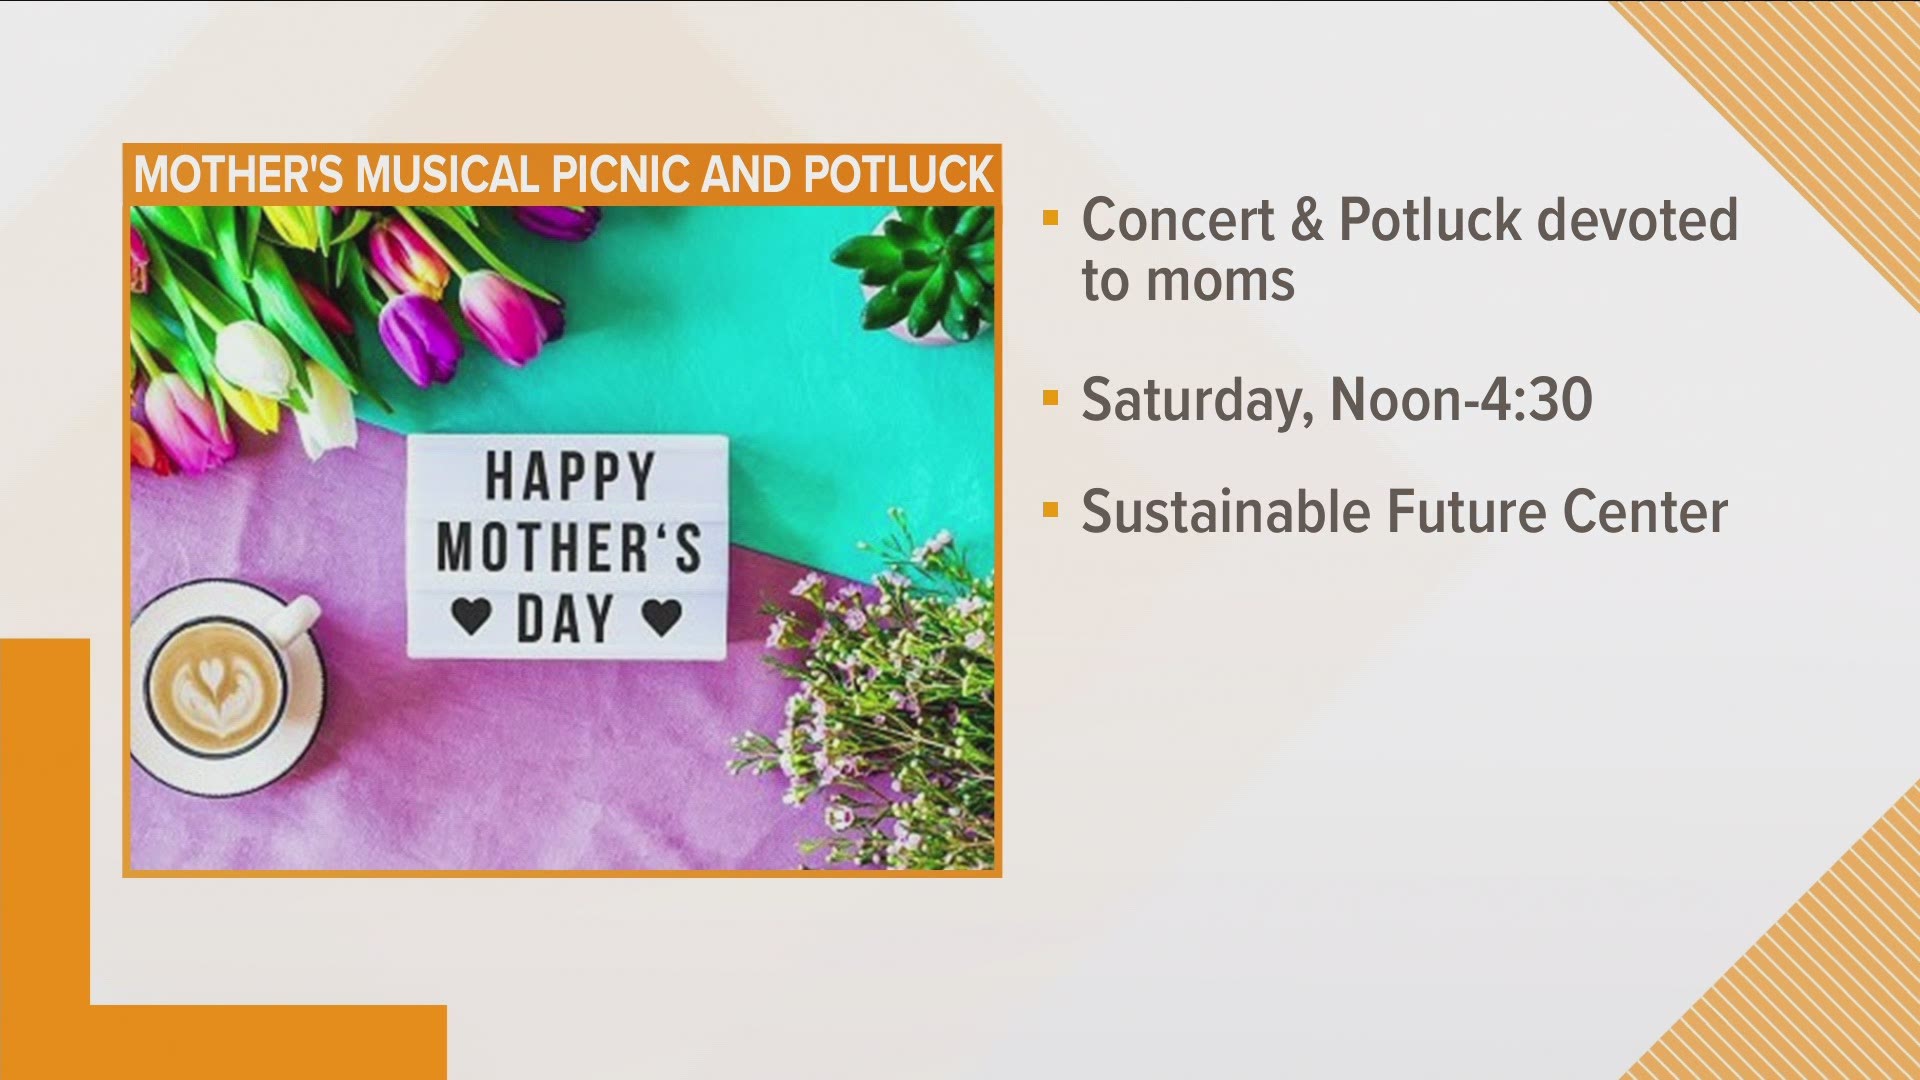 This Sunday is Mother's Day, here are some ways you can celebrate moms!